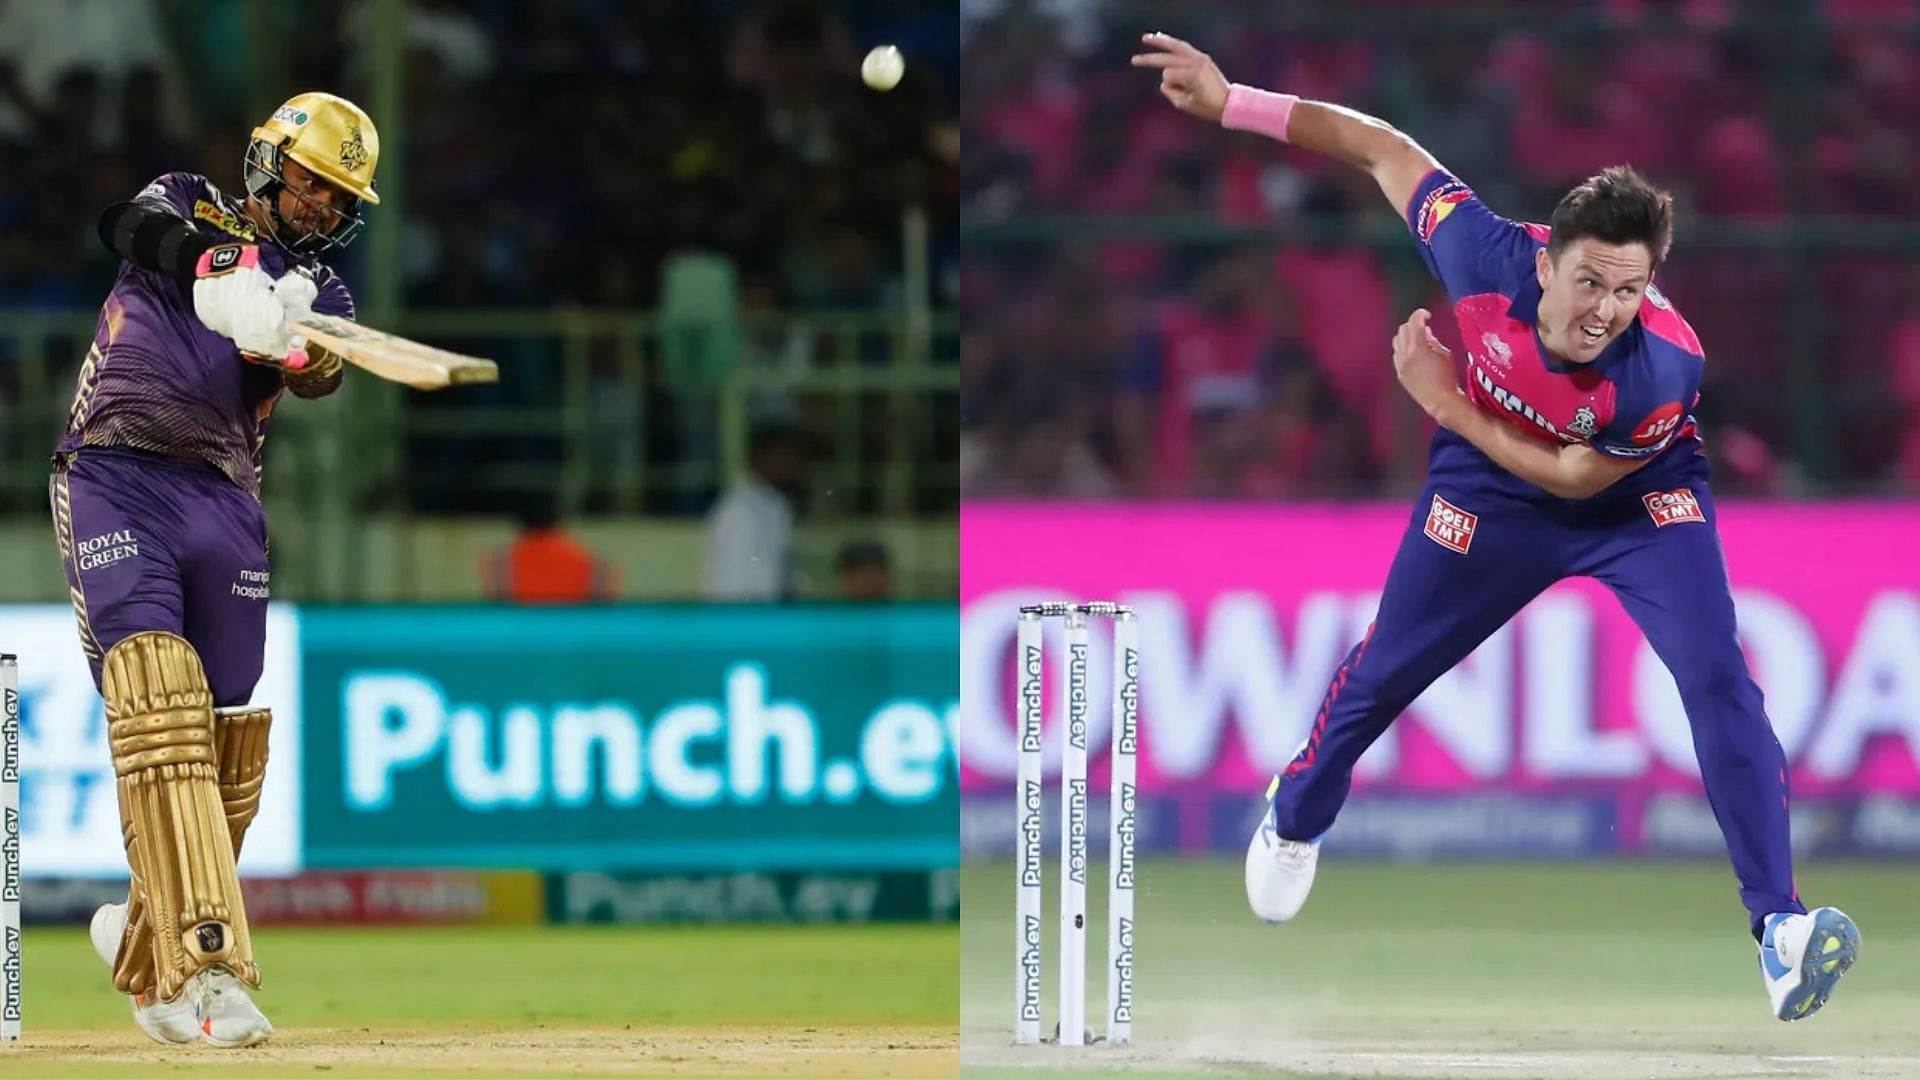 Sunil Narine (L) &amp; Trent Boult could set up an intriguing face-off upfront